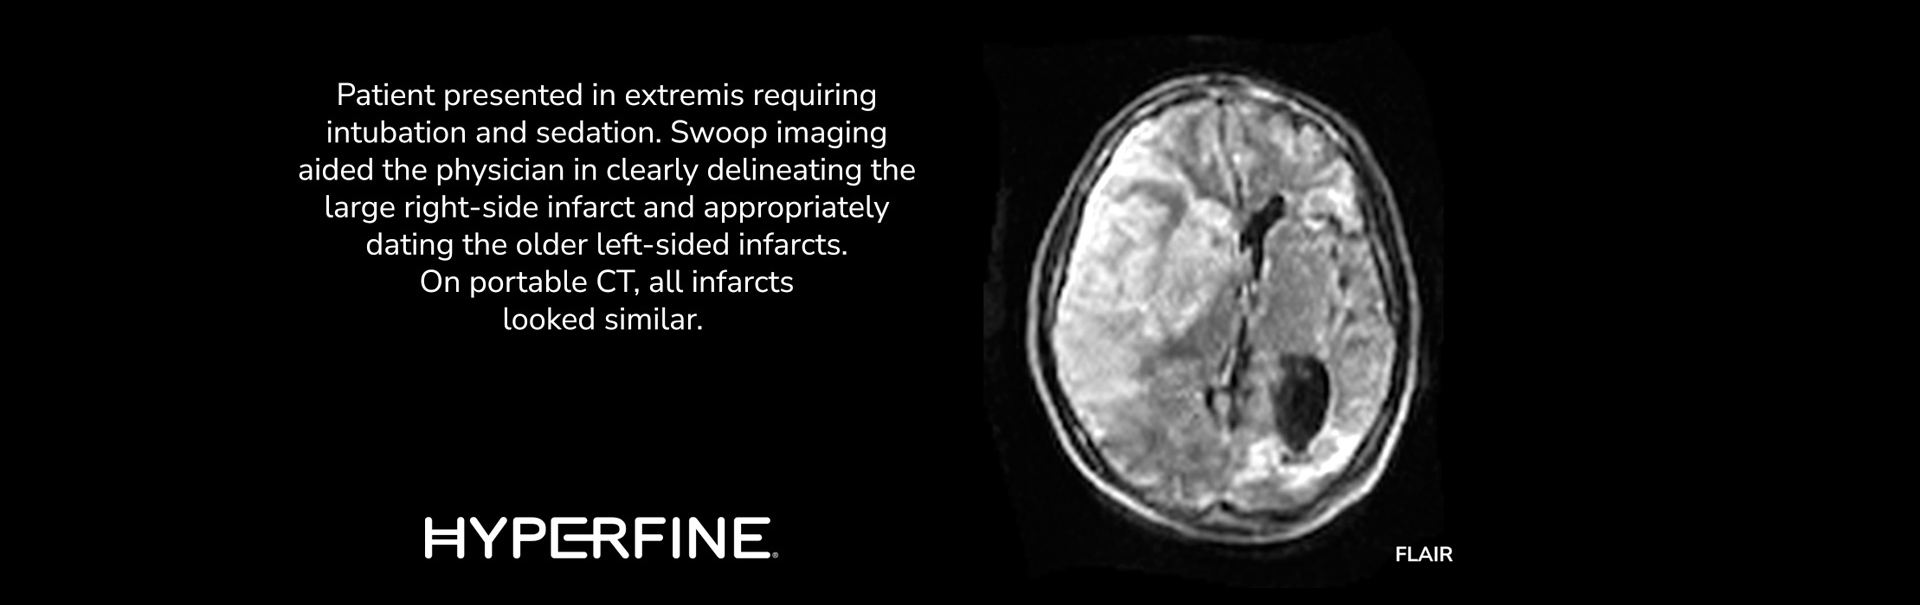 Additional Clinical Images